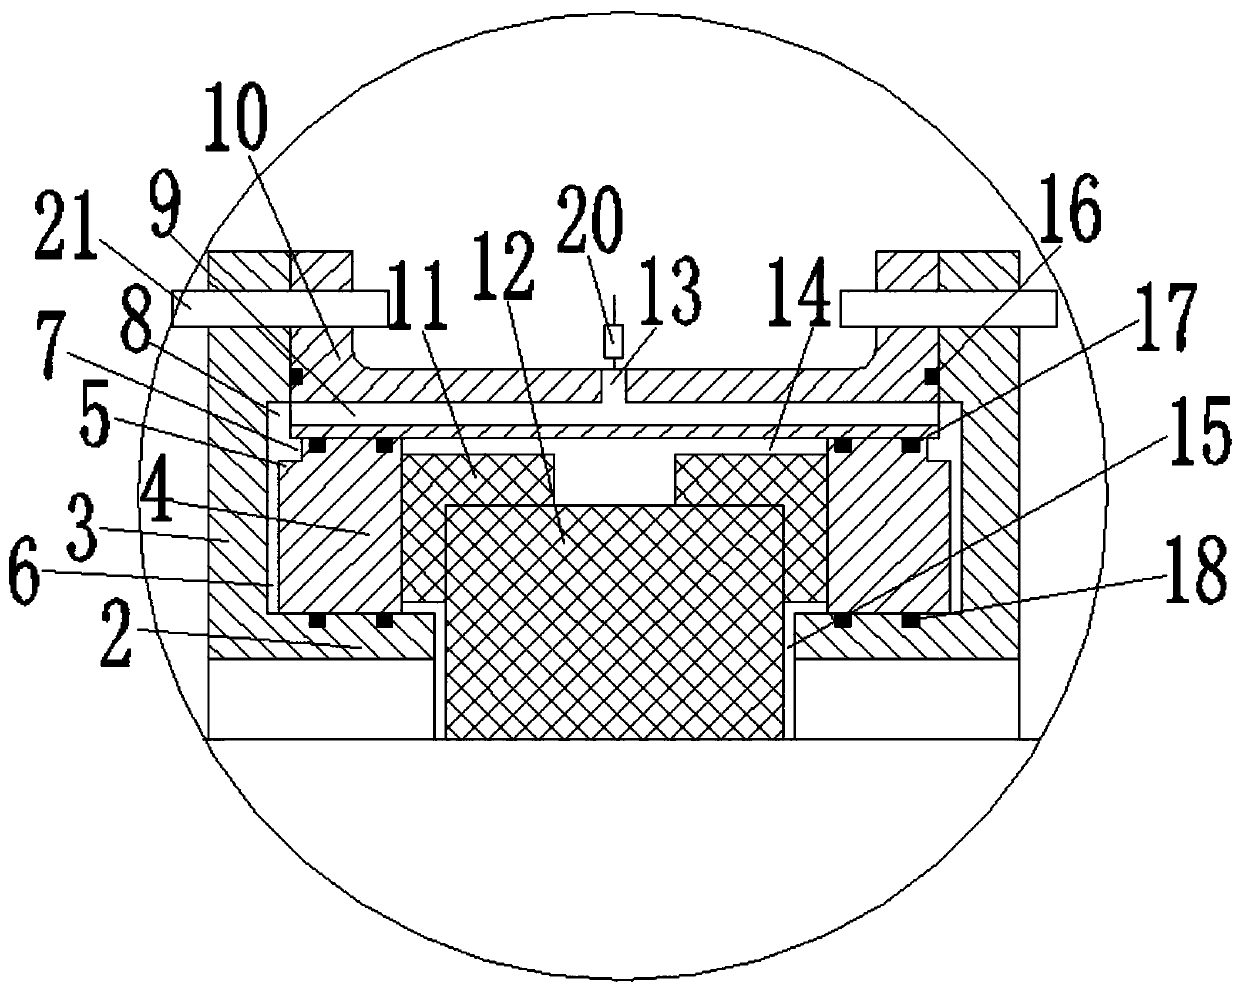 An adjustable pressure double-sided compression sealing device